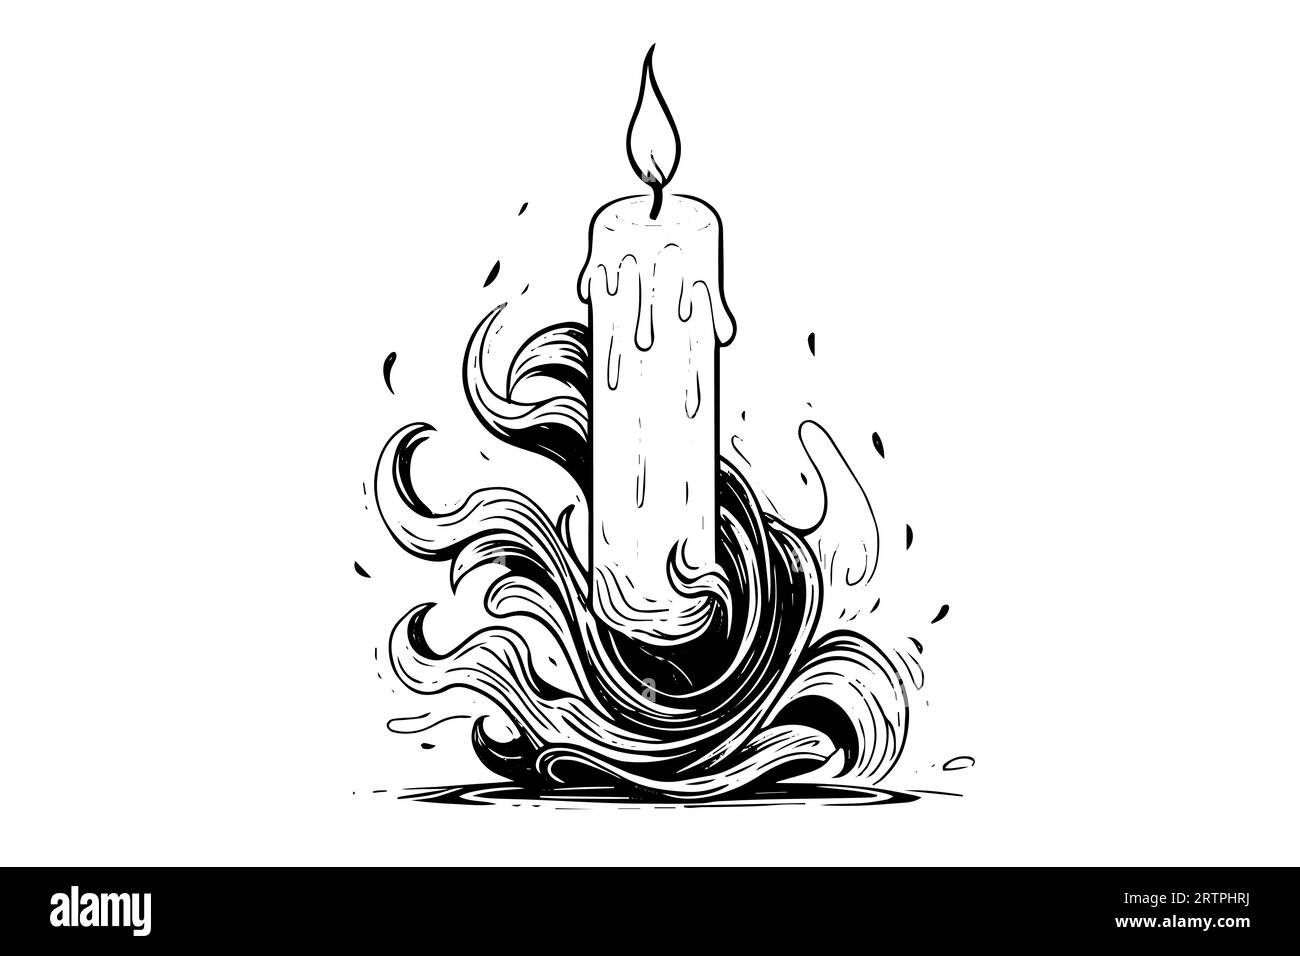 Thick christmas candles burning. Hand drawn sketch engraving style vector illustration. Stock Vector